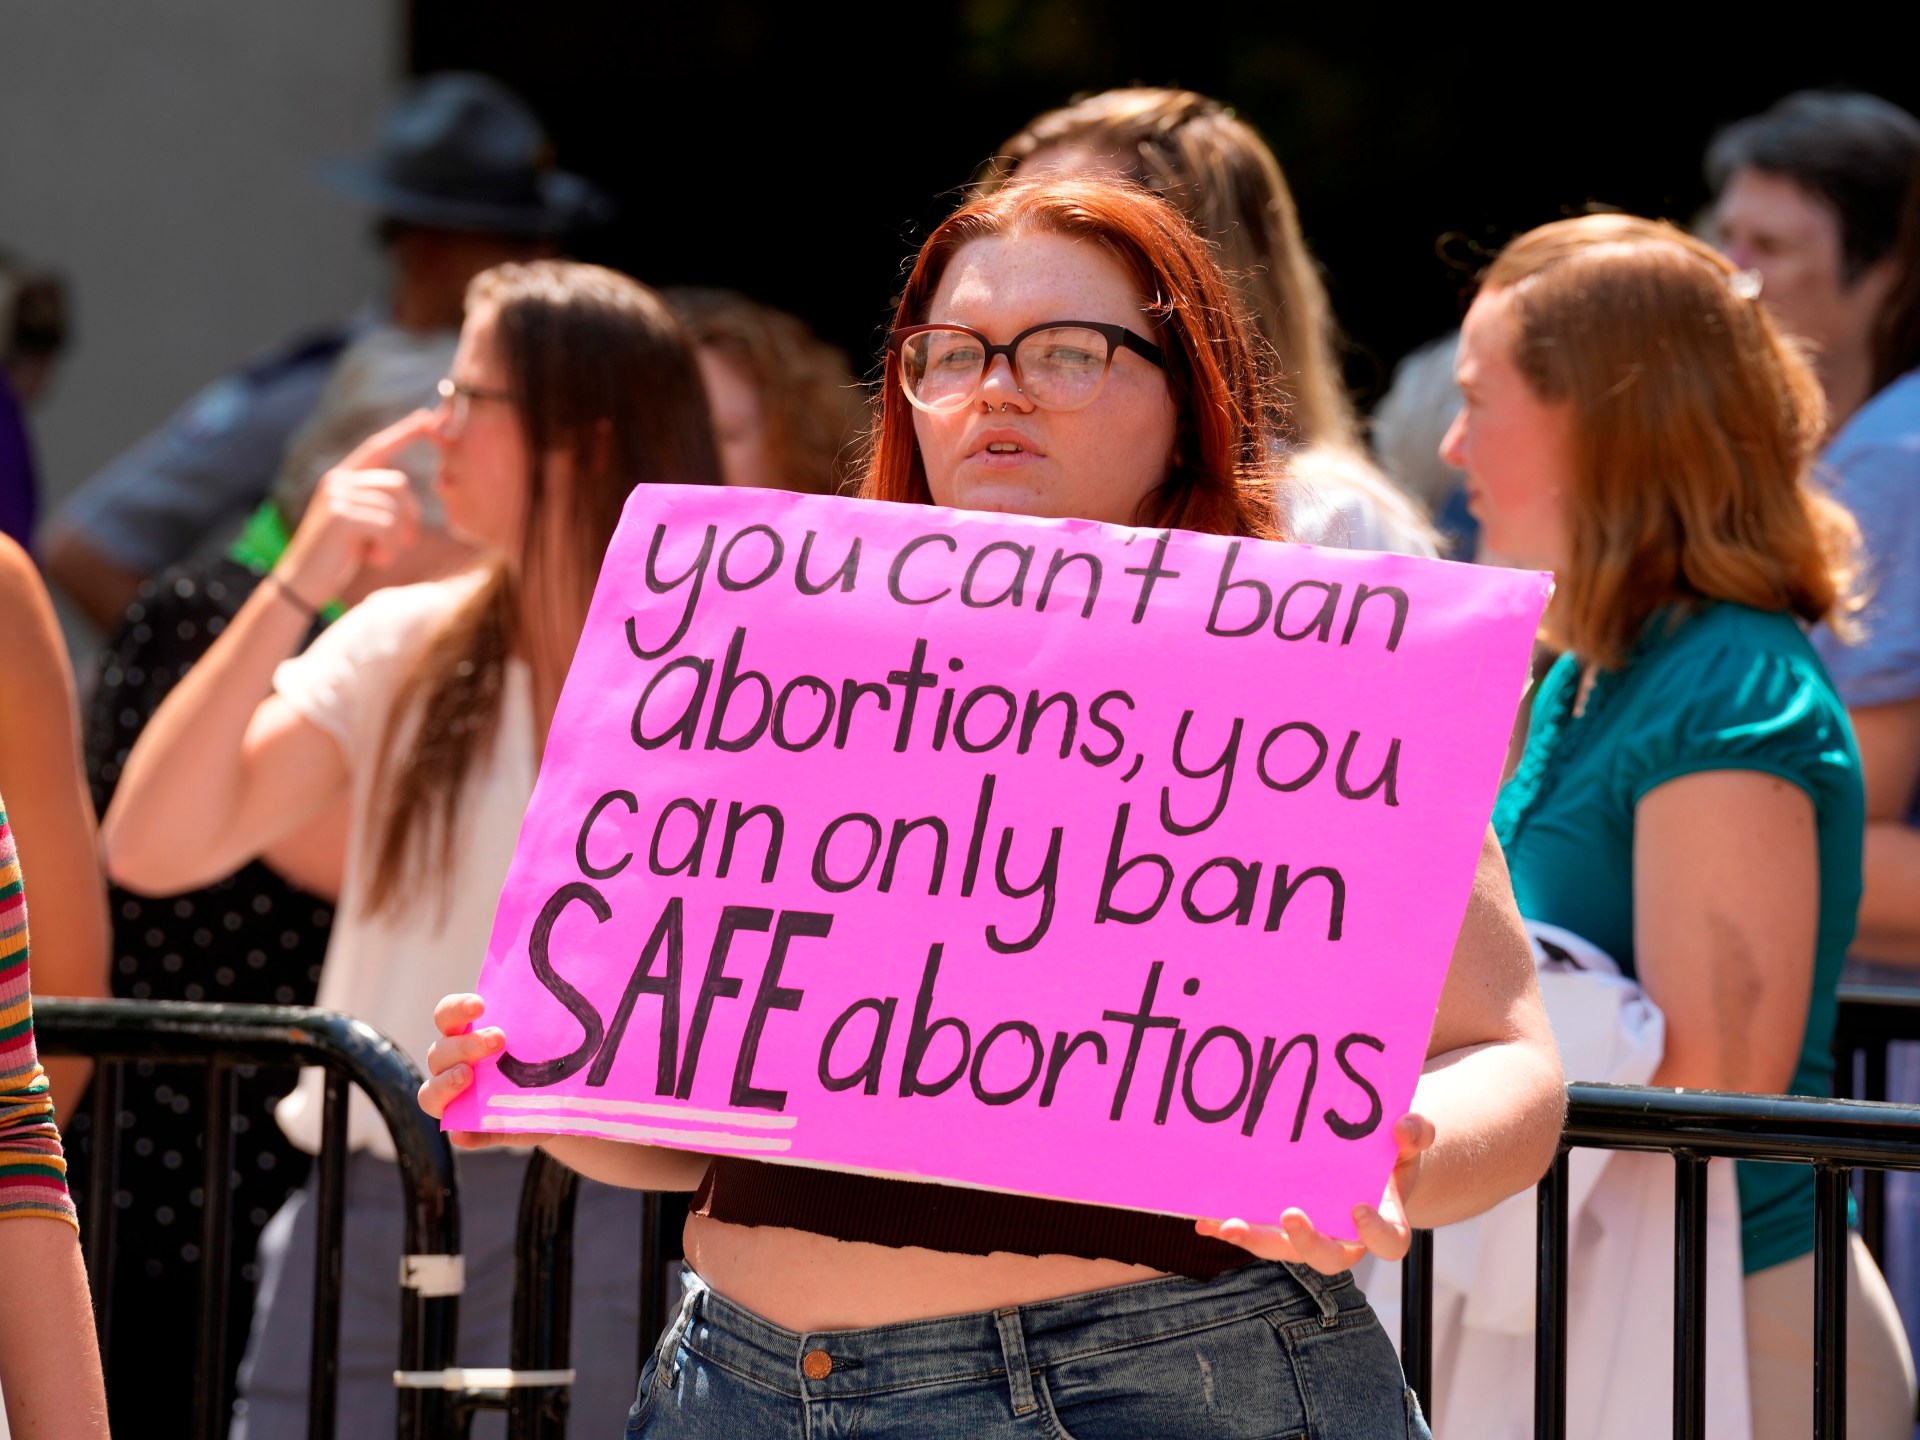 Texas Supreme Court halts order allowing emergency abortion | Women’s Rights News #Texas #Supreme #Court #halts #order #allowing #emergency #abortion #Womens #Rights #News